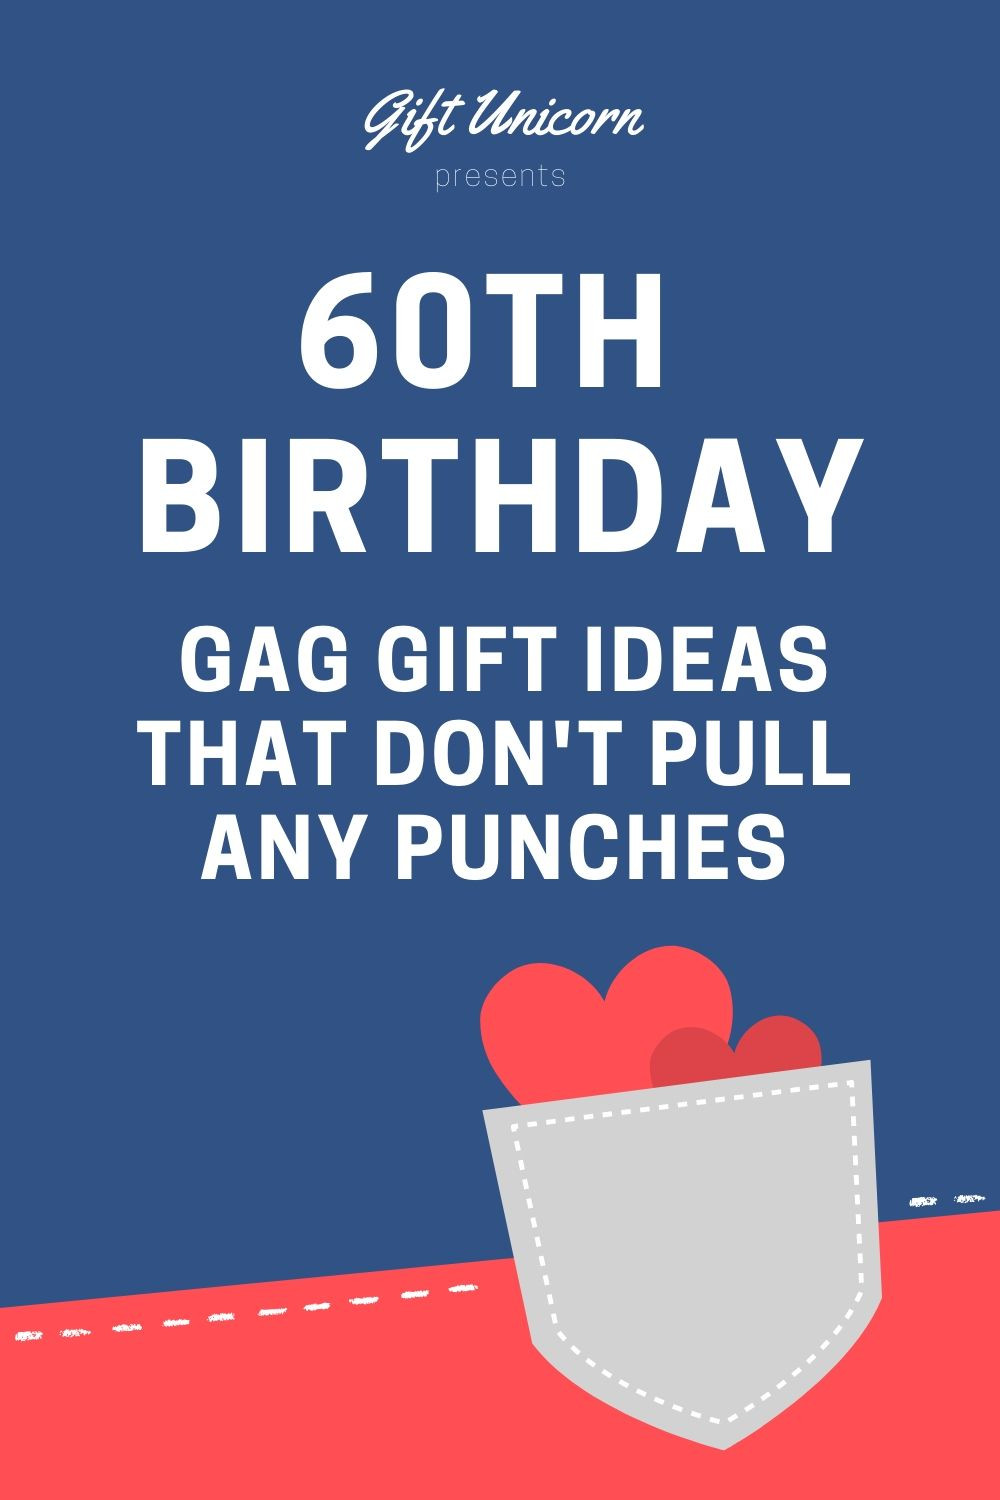 60th Birthday Gag Gift Ideas
 60th Birthday Gag Gift Ideas That Don t Pull Any Punches